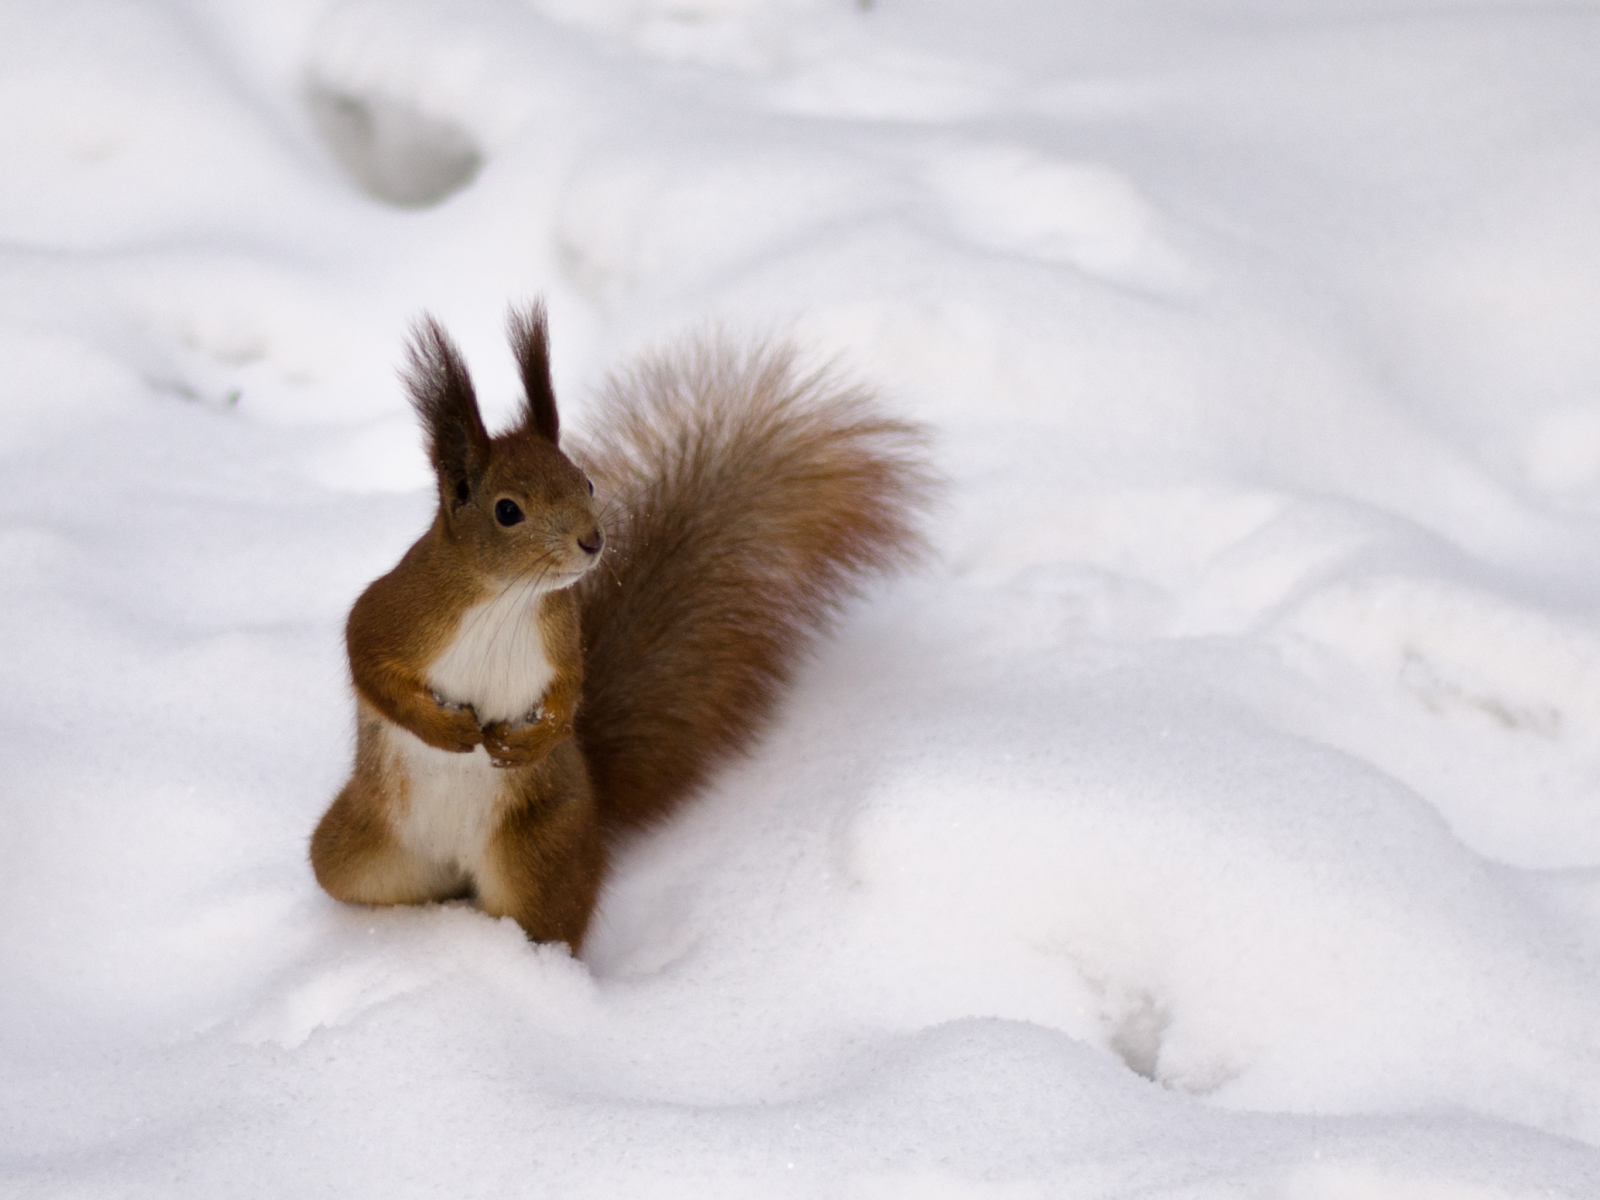 Funny Squirrel On Snow wallpaper 1600x1200